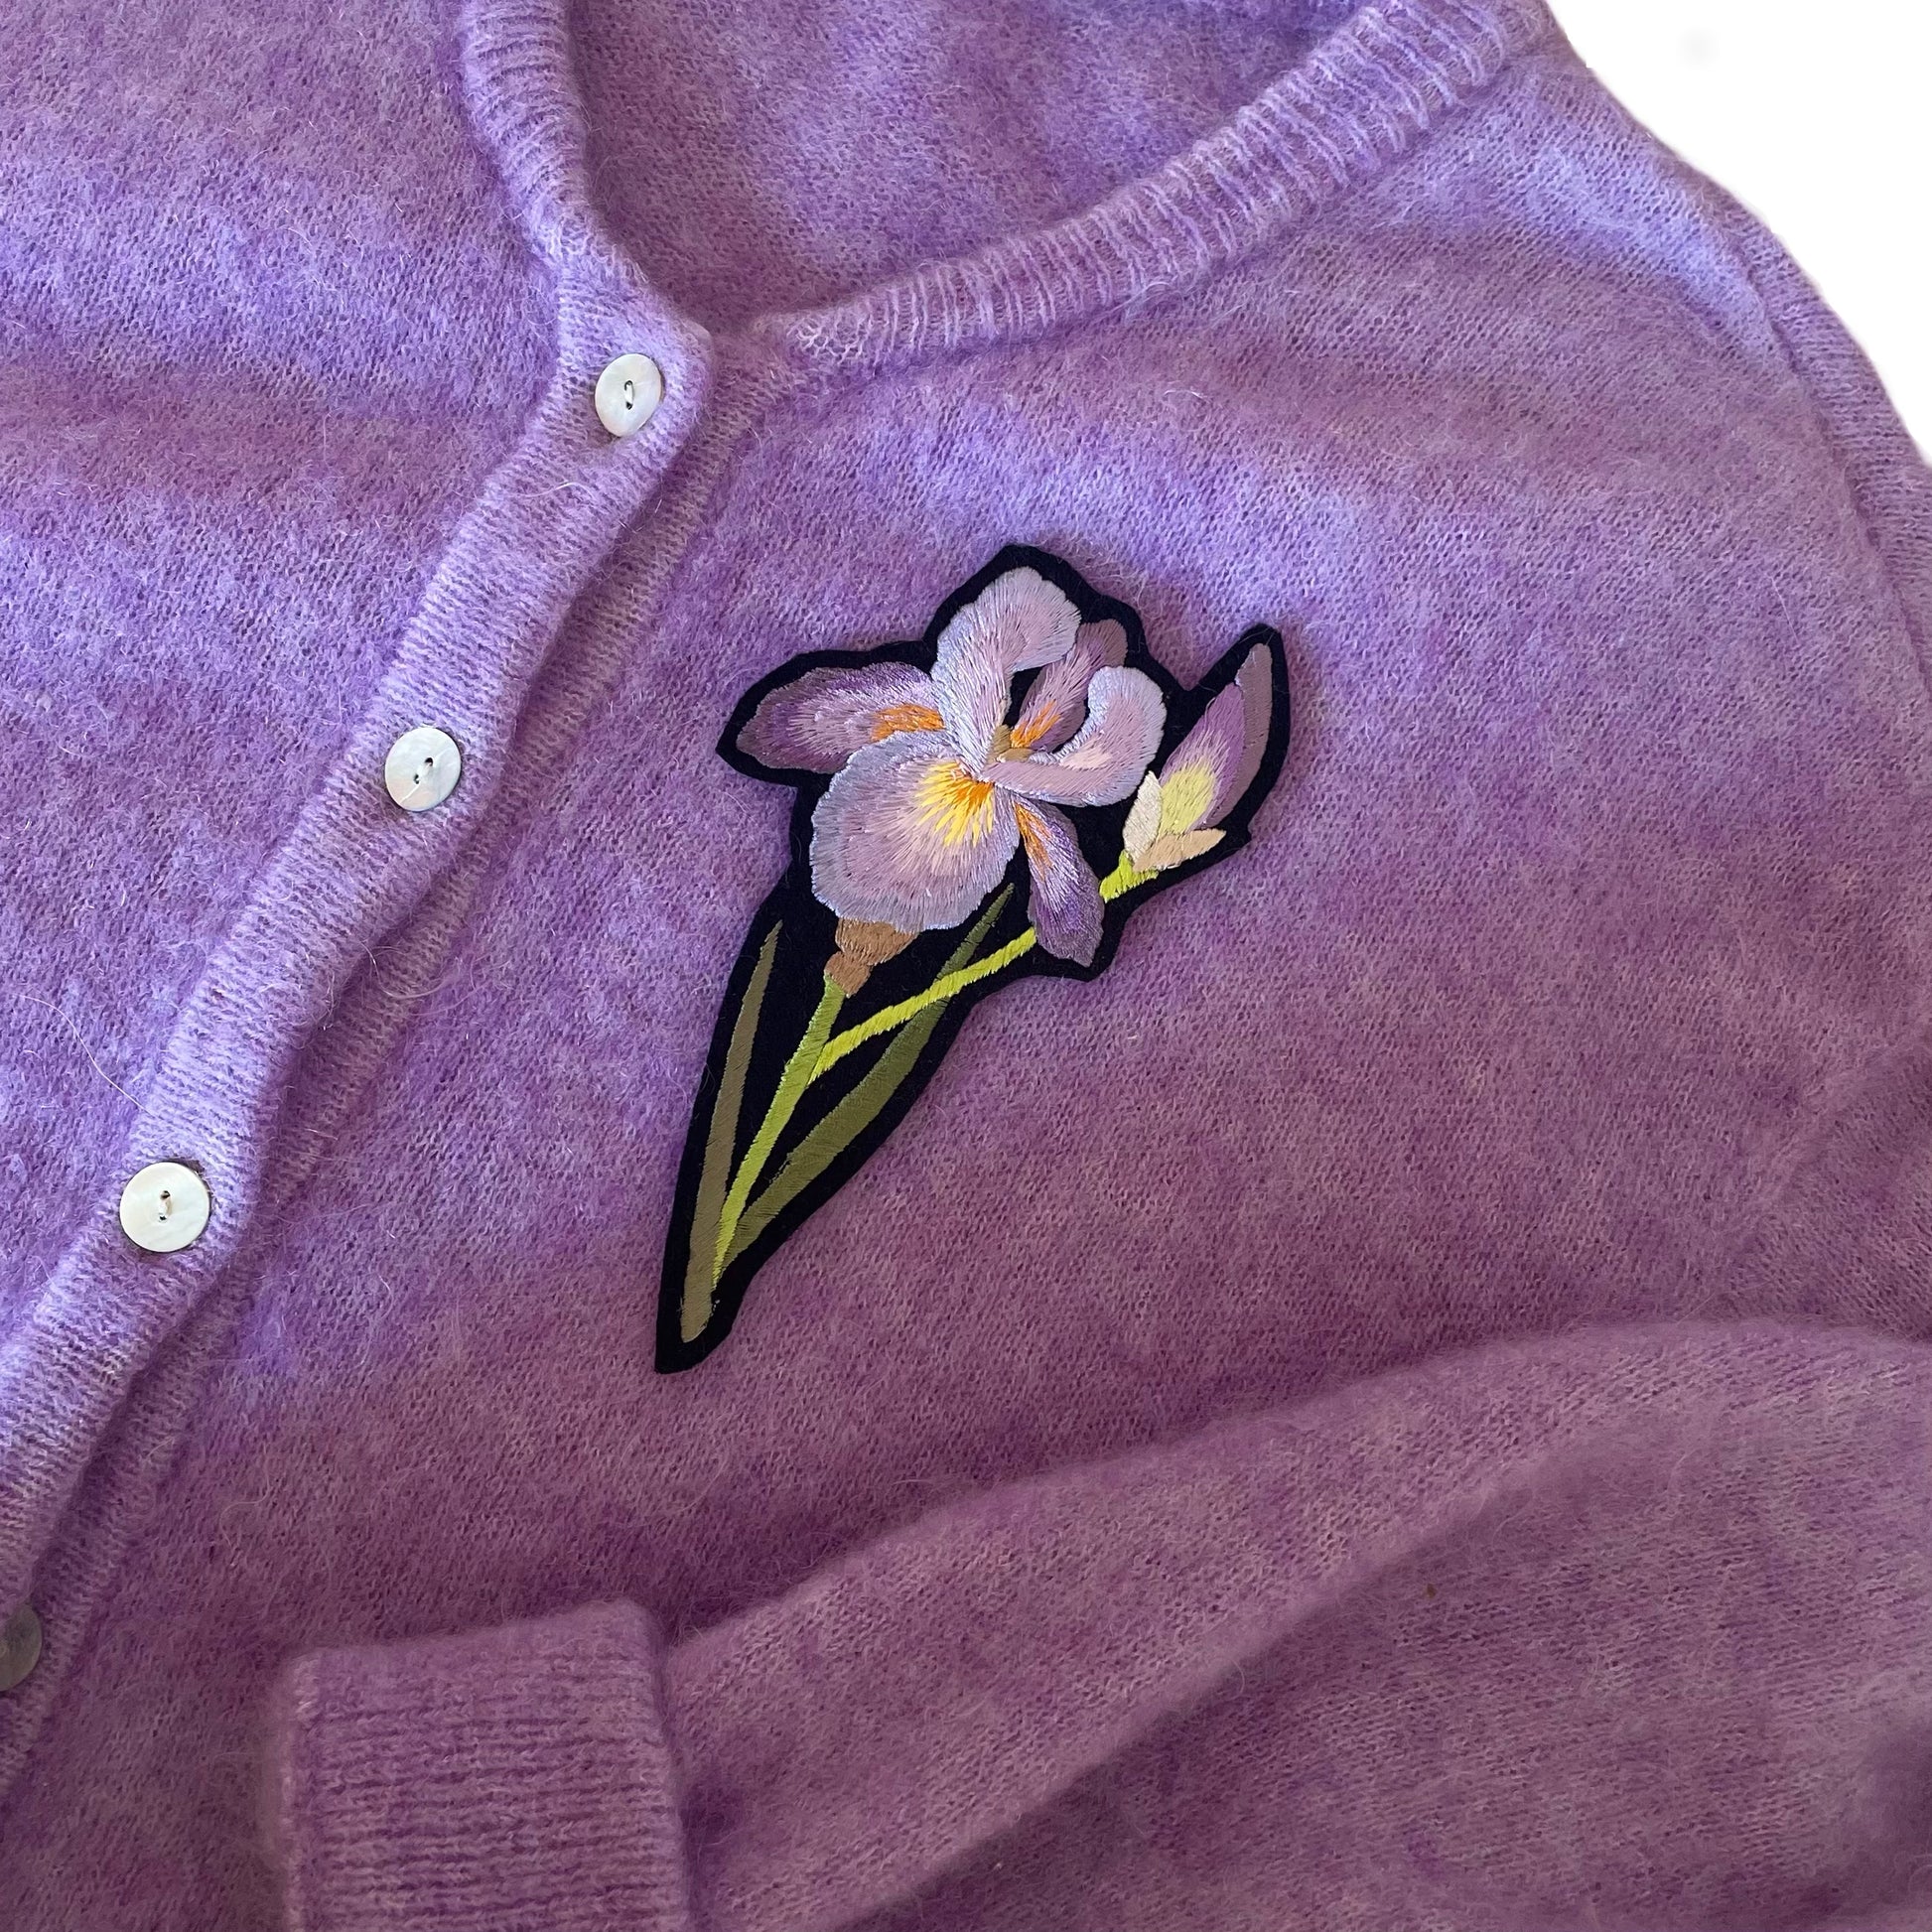 Embroidered iris patch shown on the breast of a purple cardigan